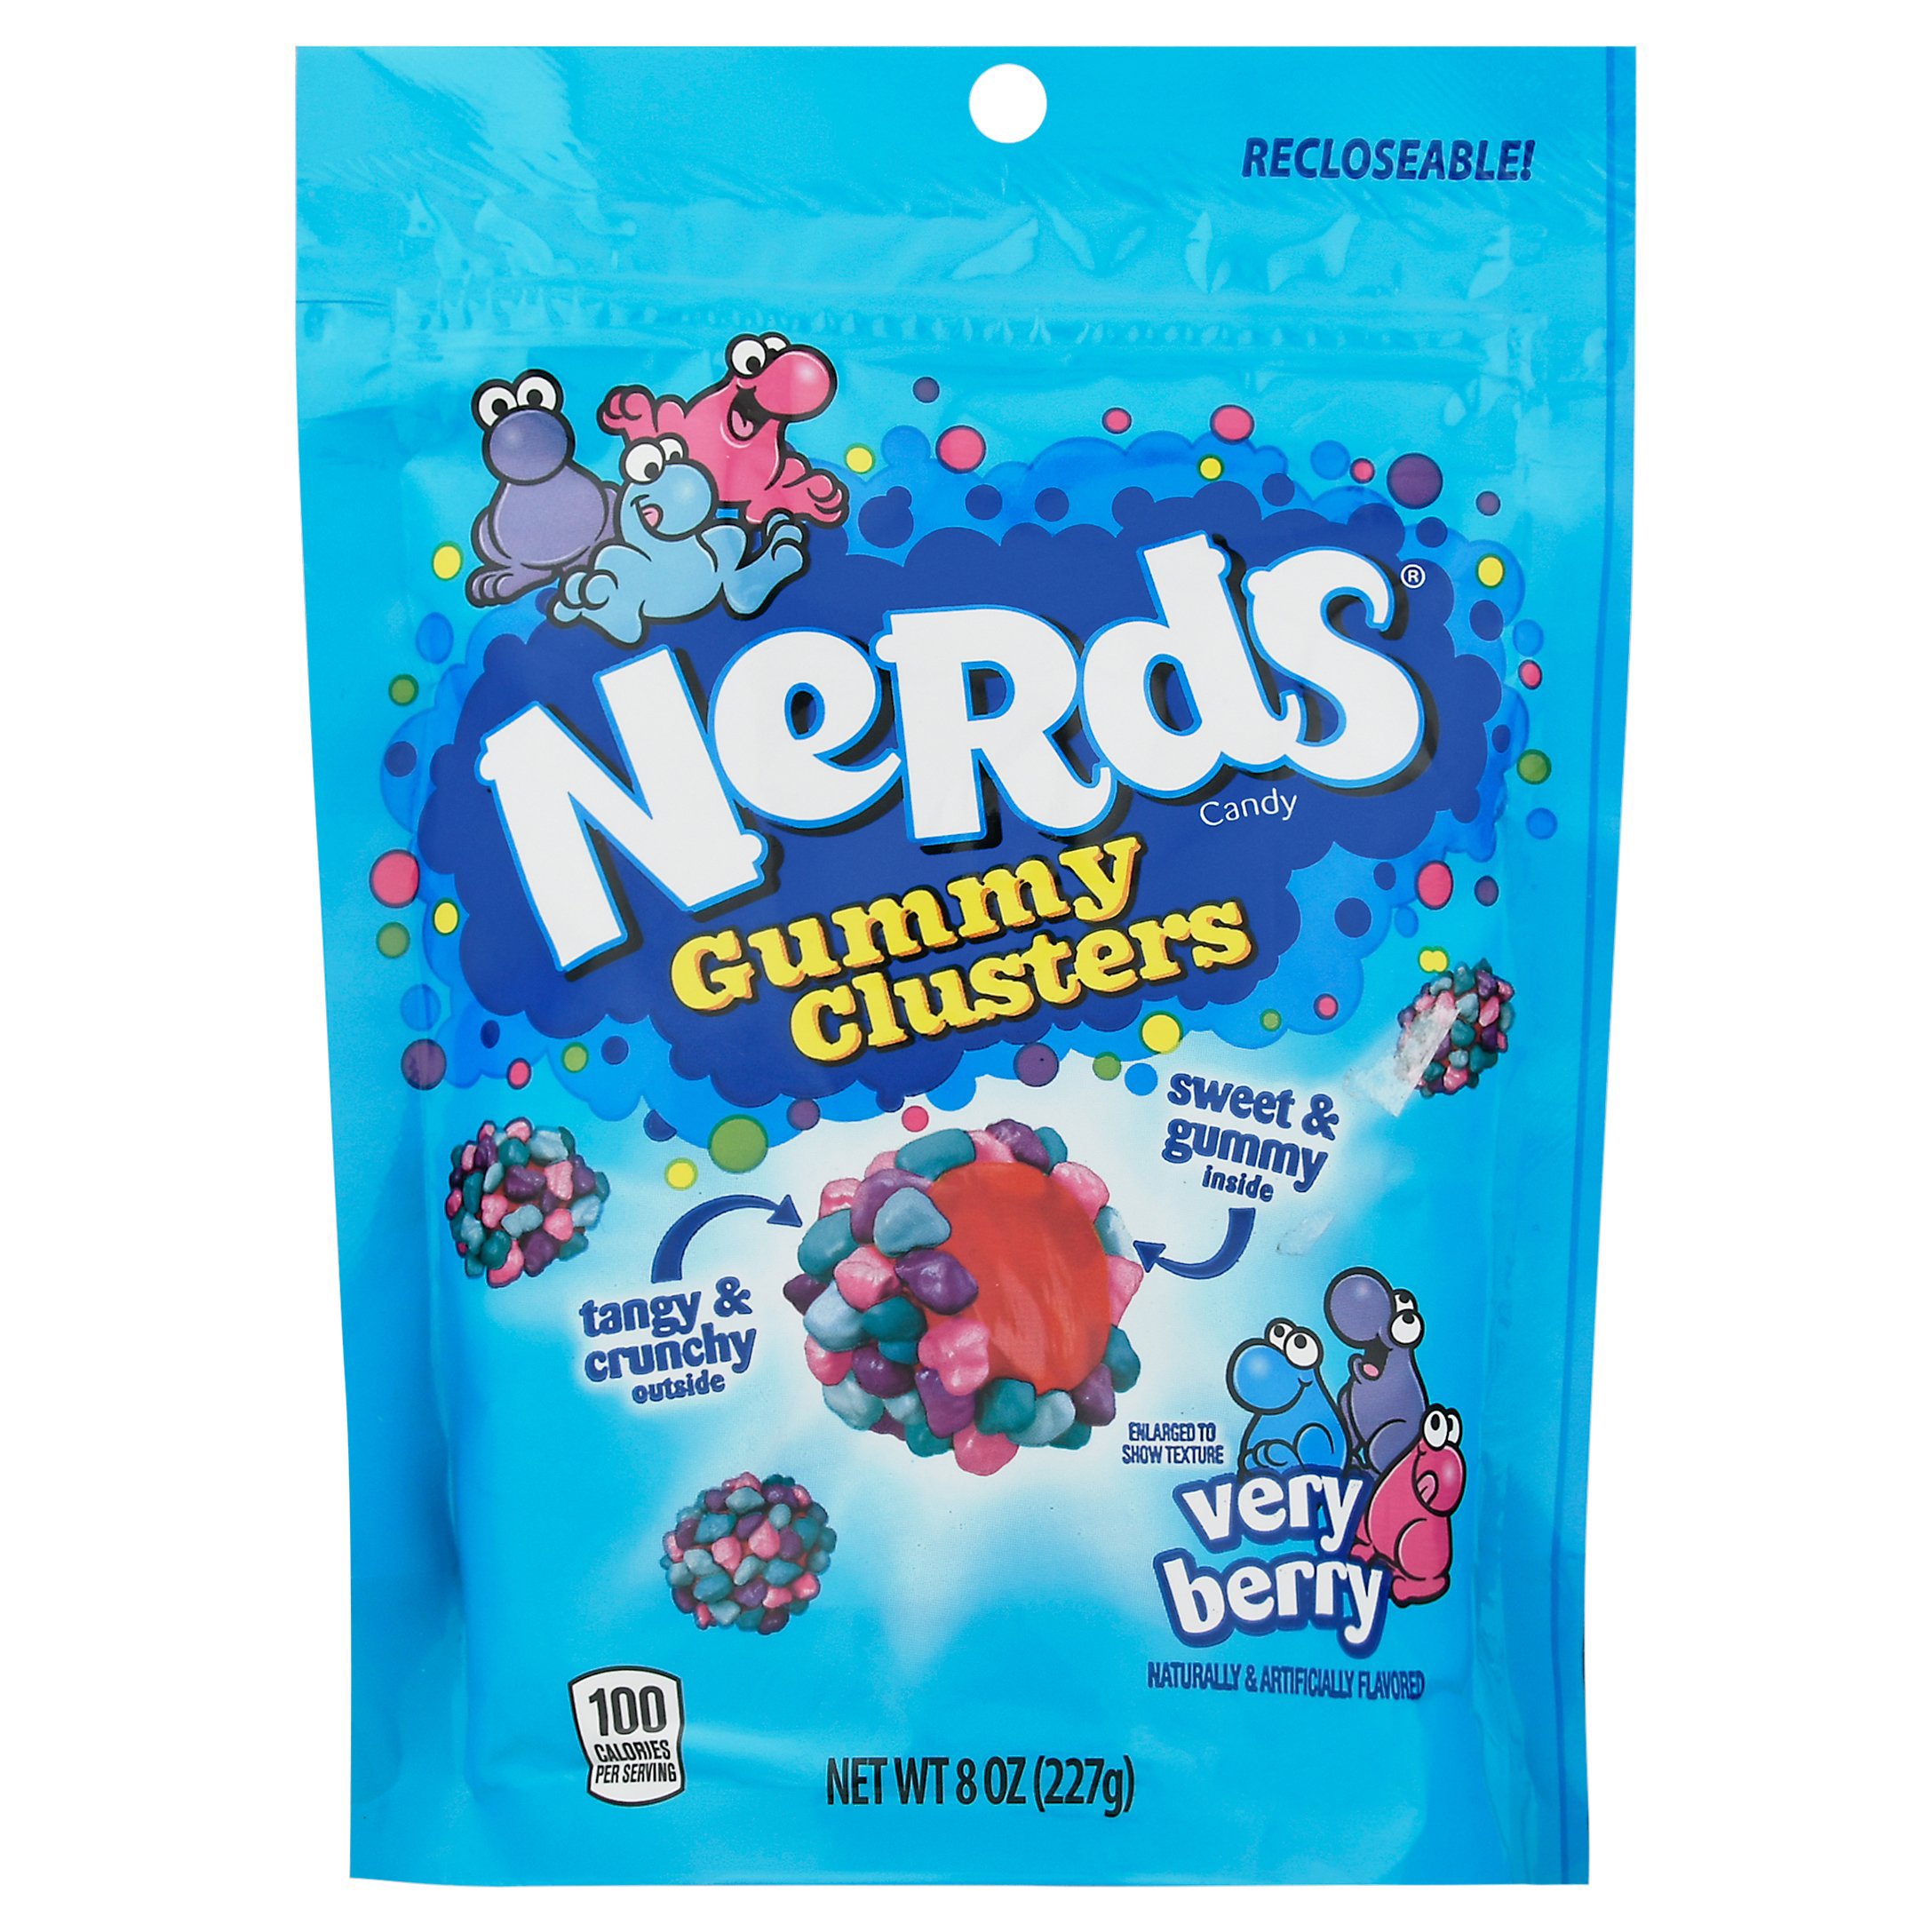 Nerds Very Berry Gummy Clusters Candy Shop Candy At H E B